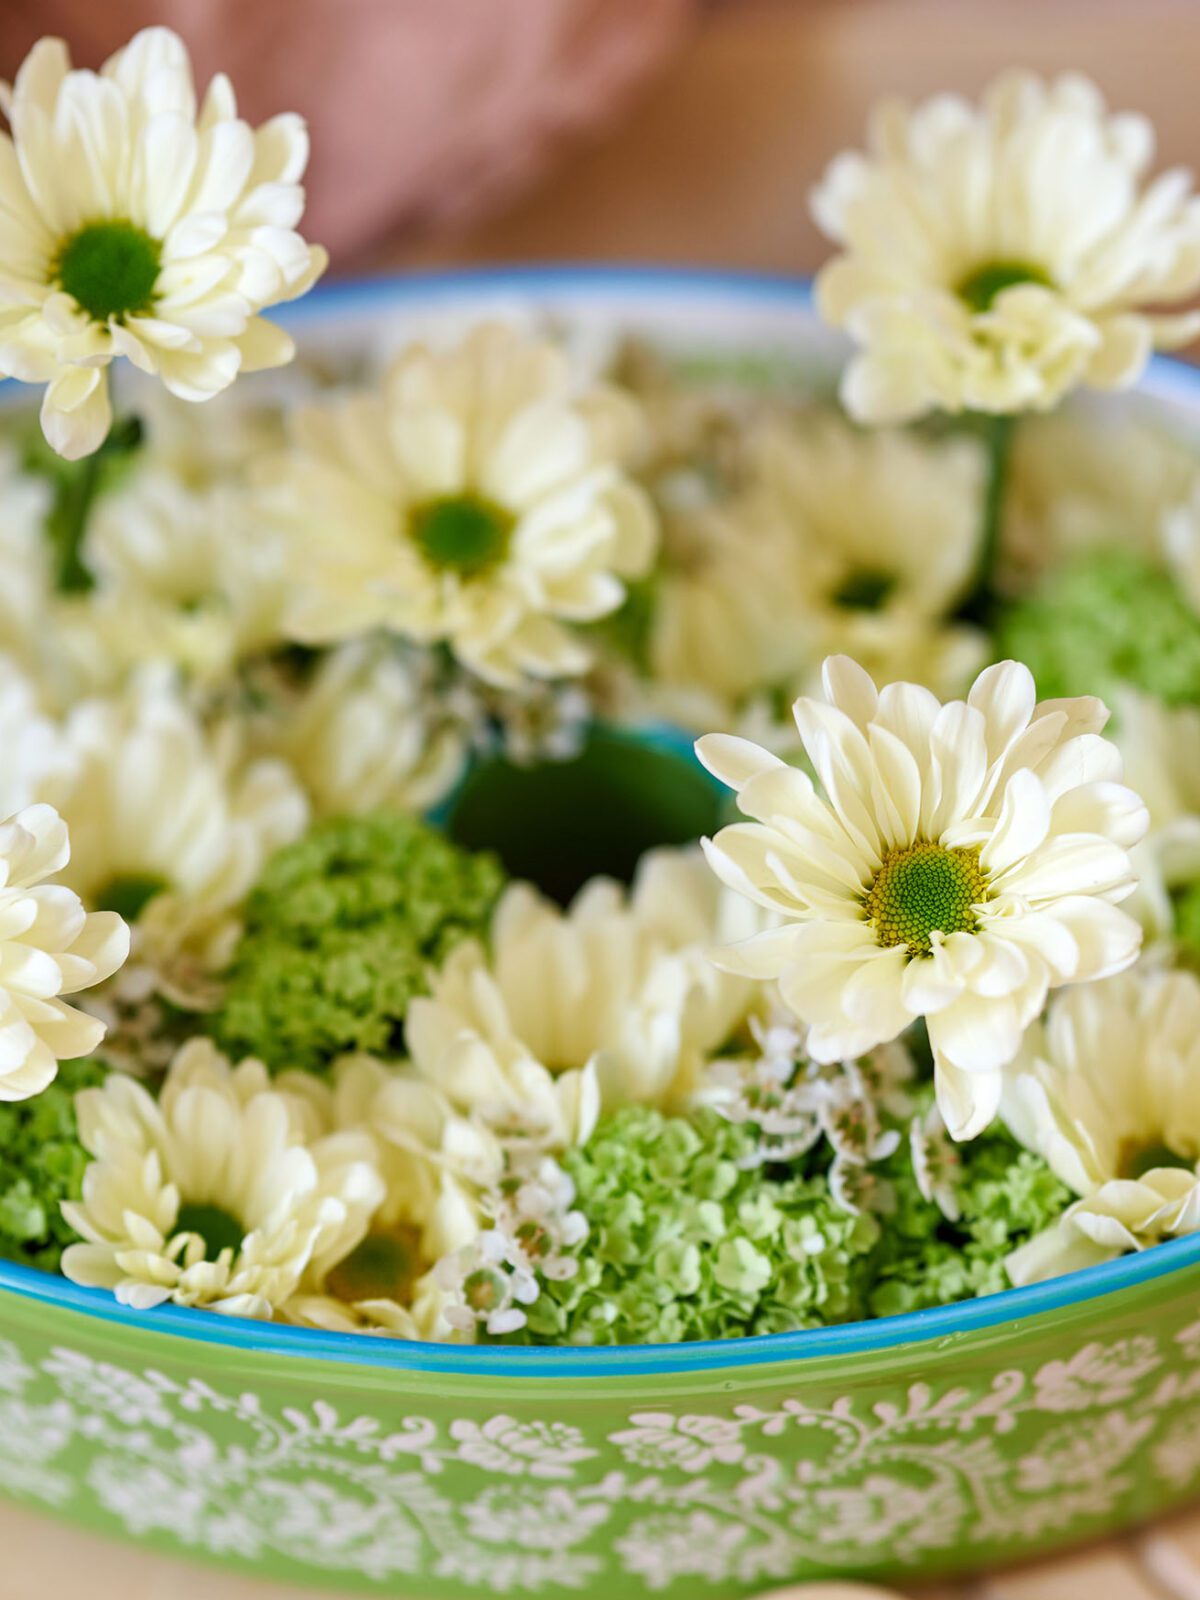 Create sparkling Mother’s Day bouquets with Prosecco